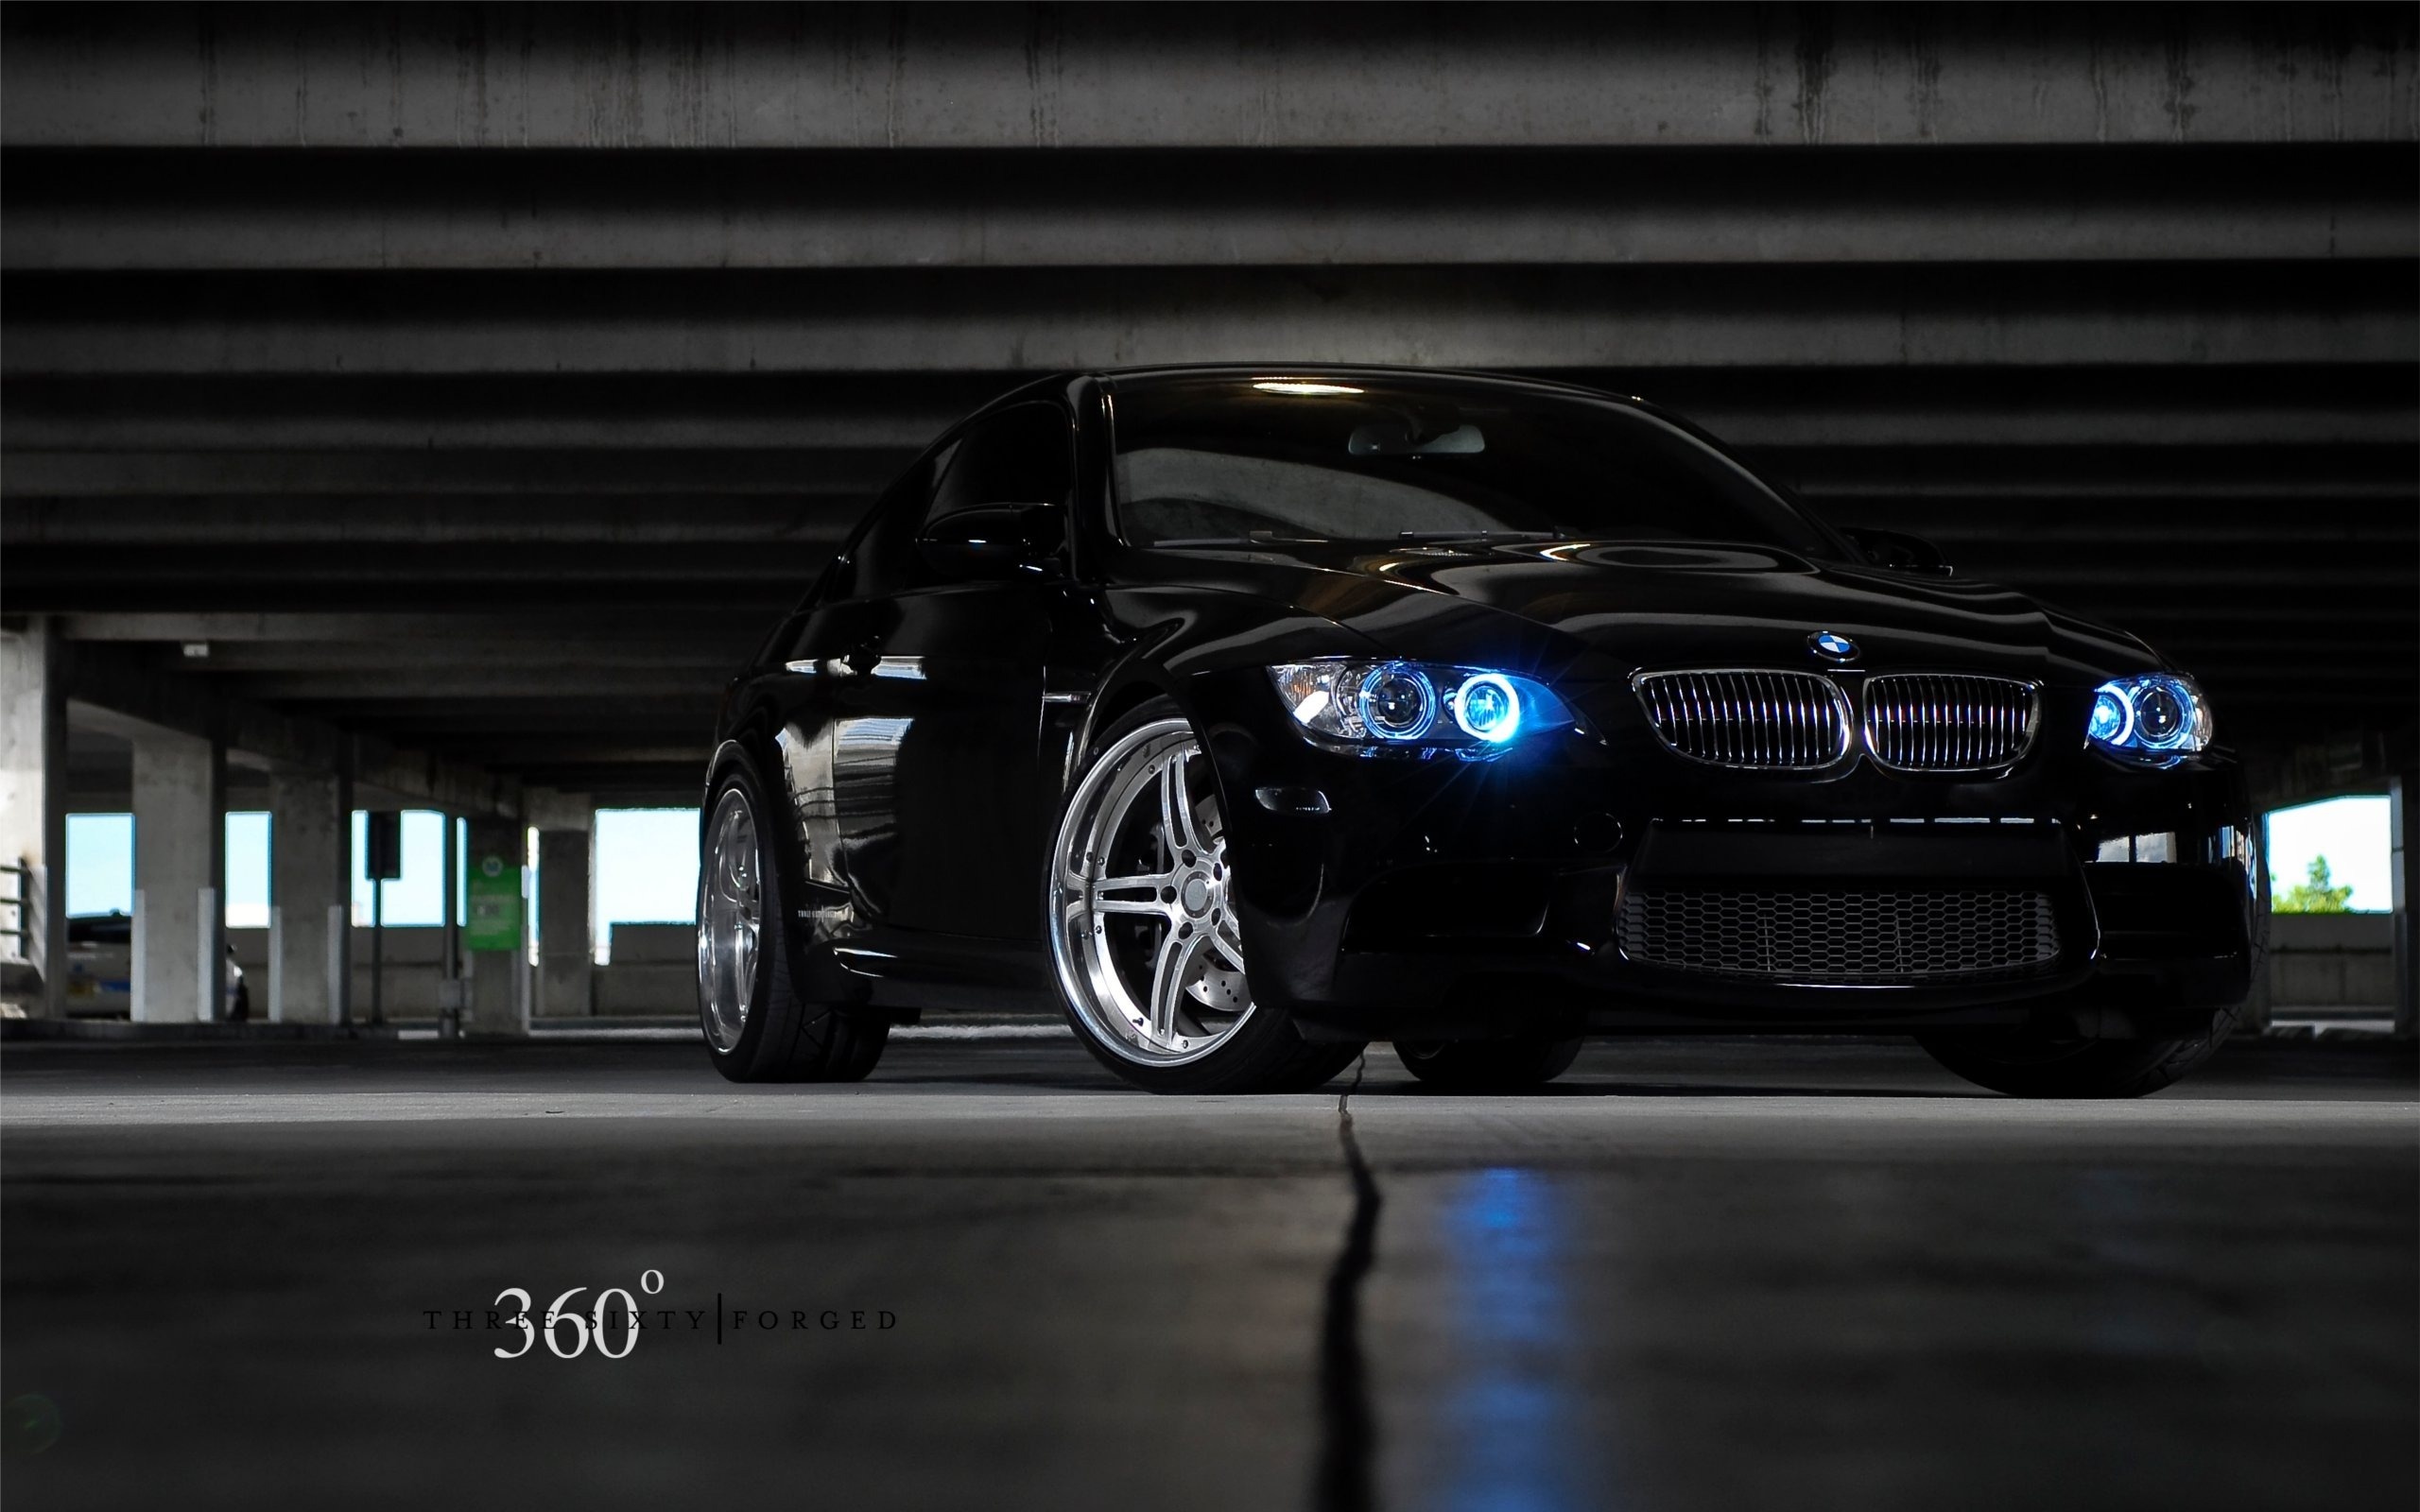 Download wallpapers E46, BMW 3-series, coupe, headlights, tuning, black m3,  BMW for desktop free. Pictures for desktop free